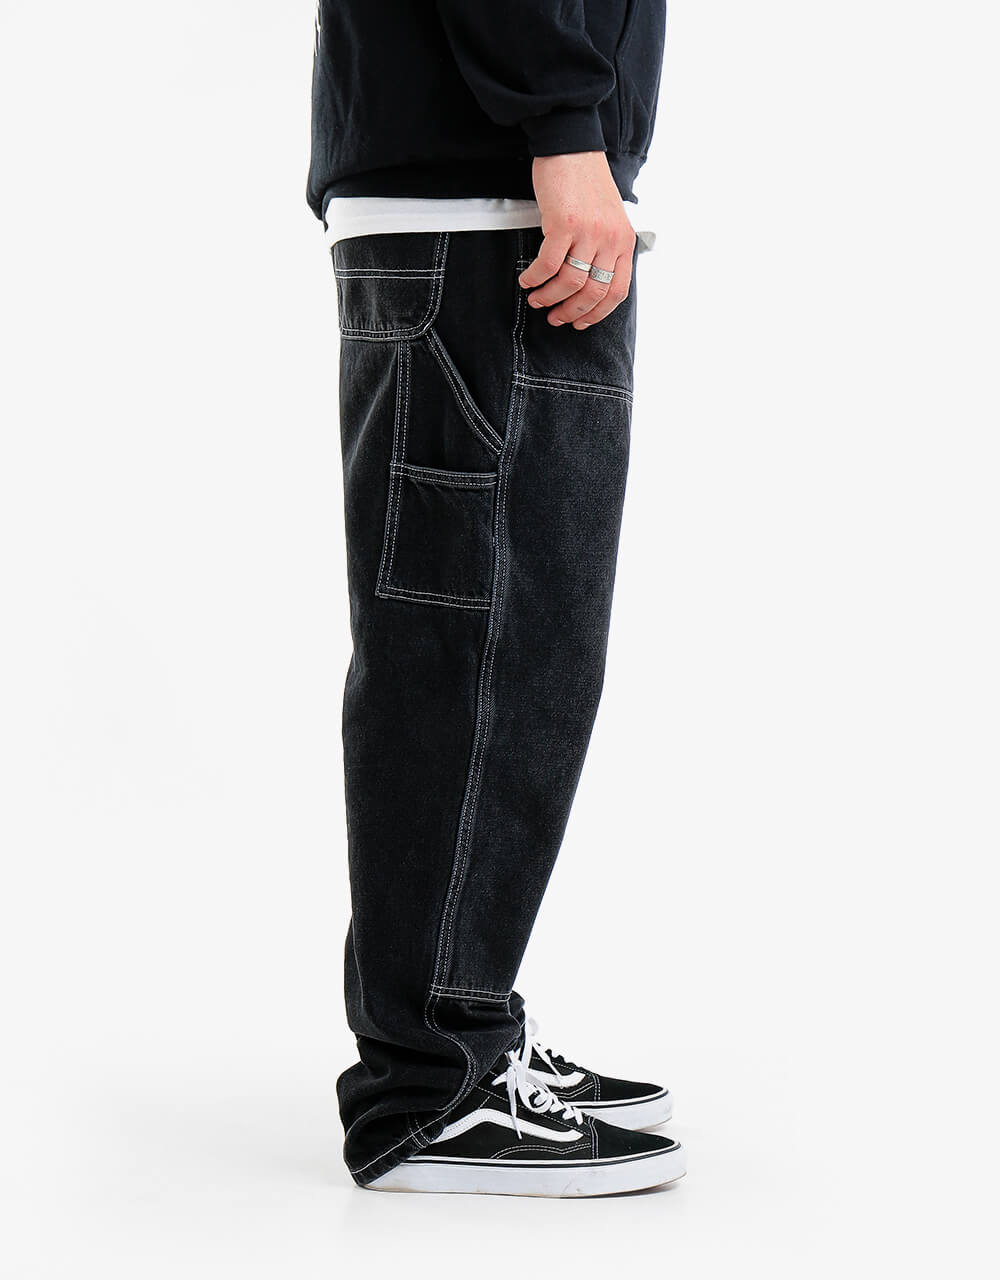 Route One Double Knee Denim Pants - Washed Black